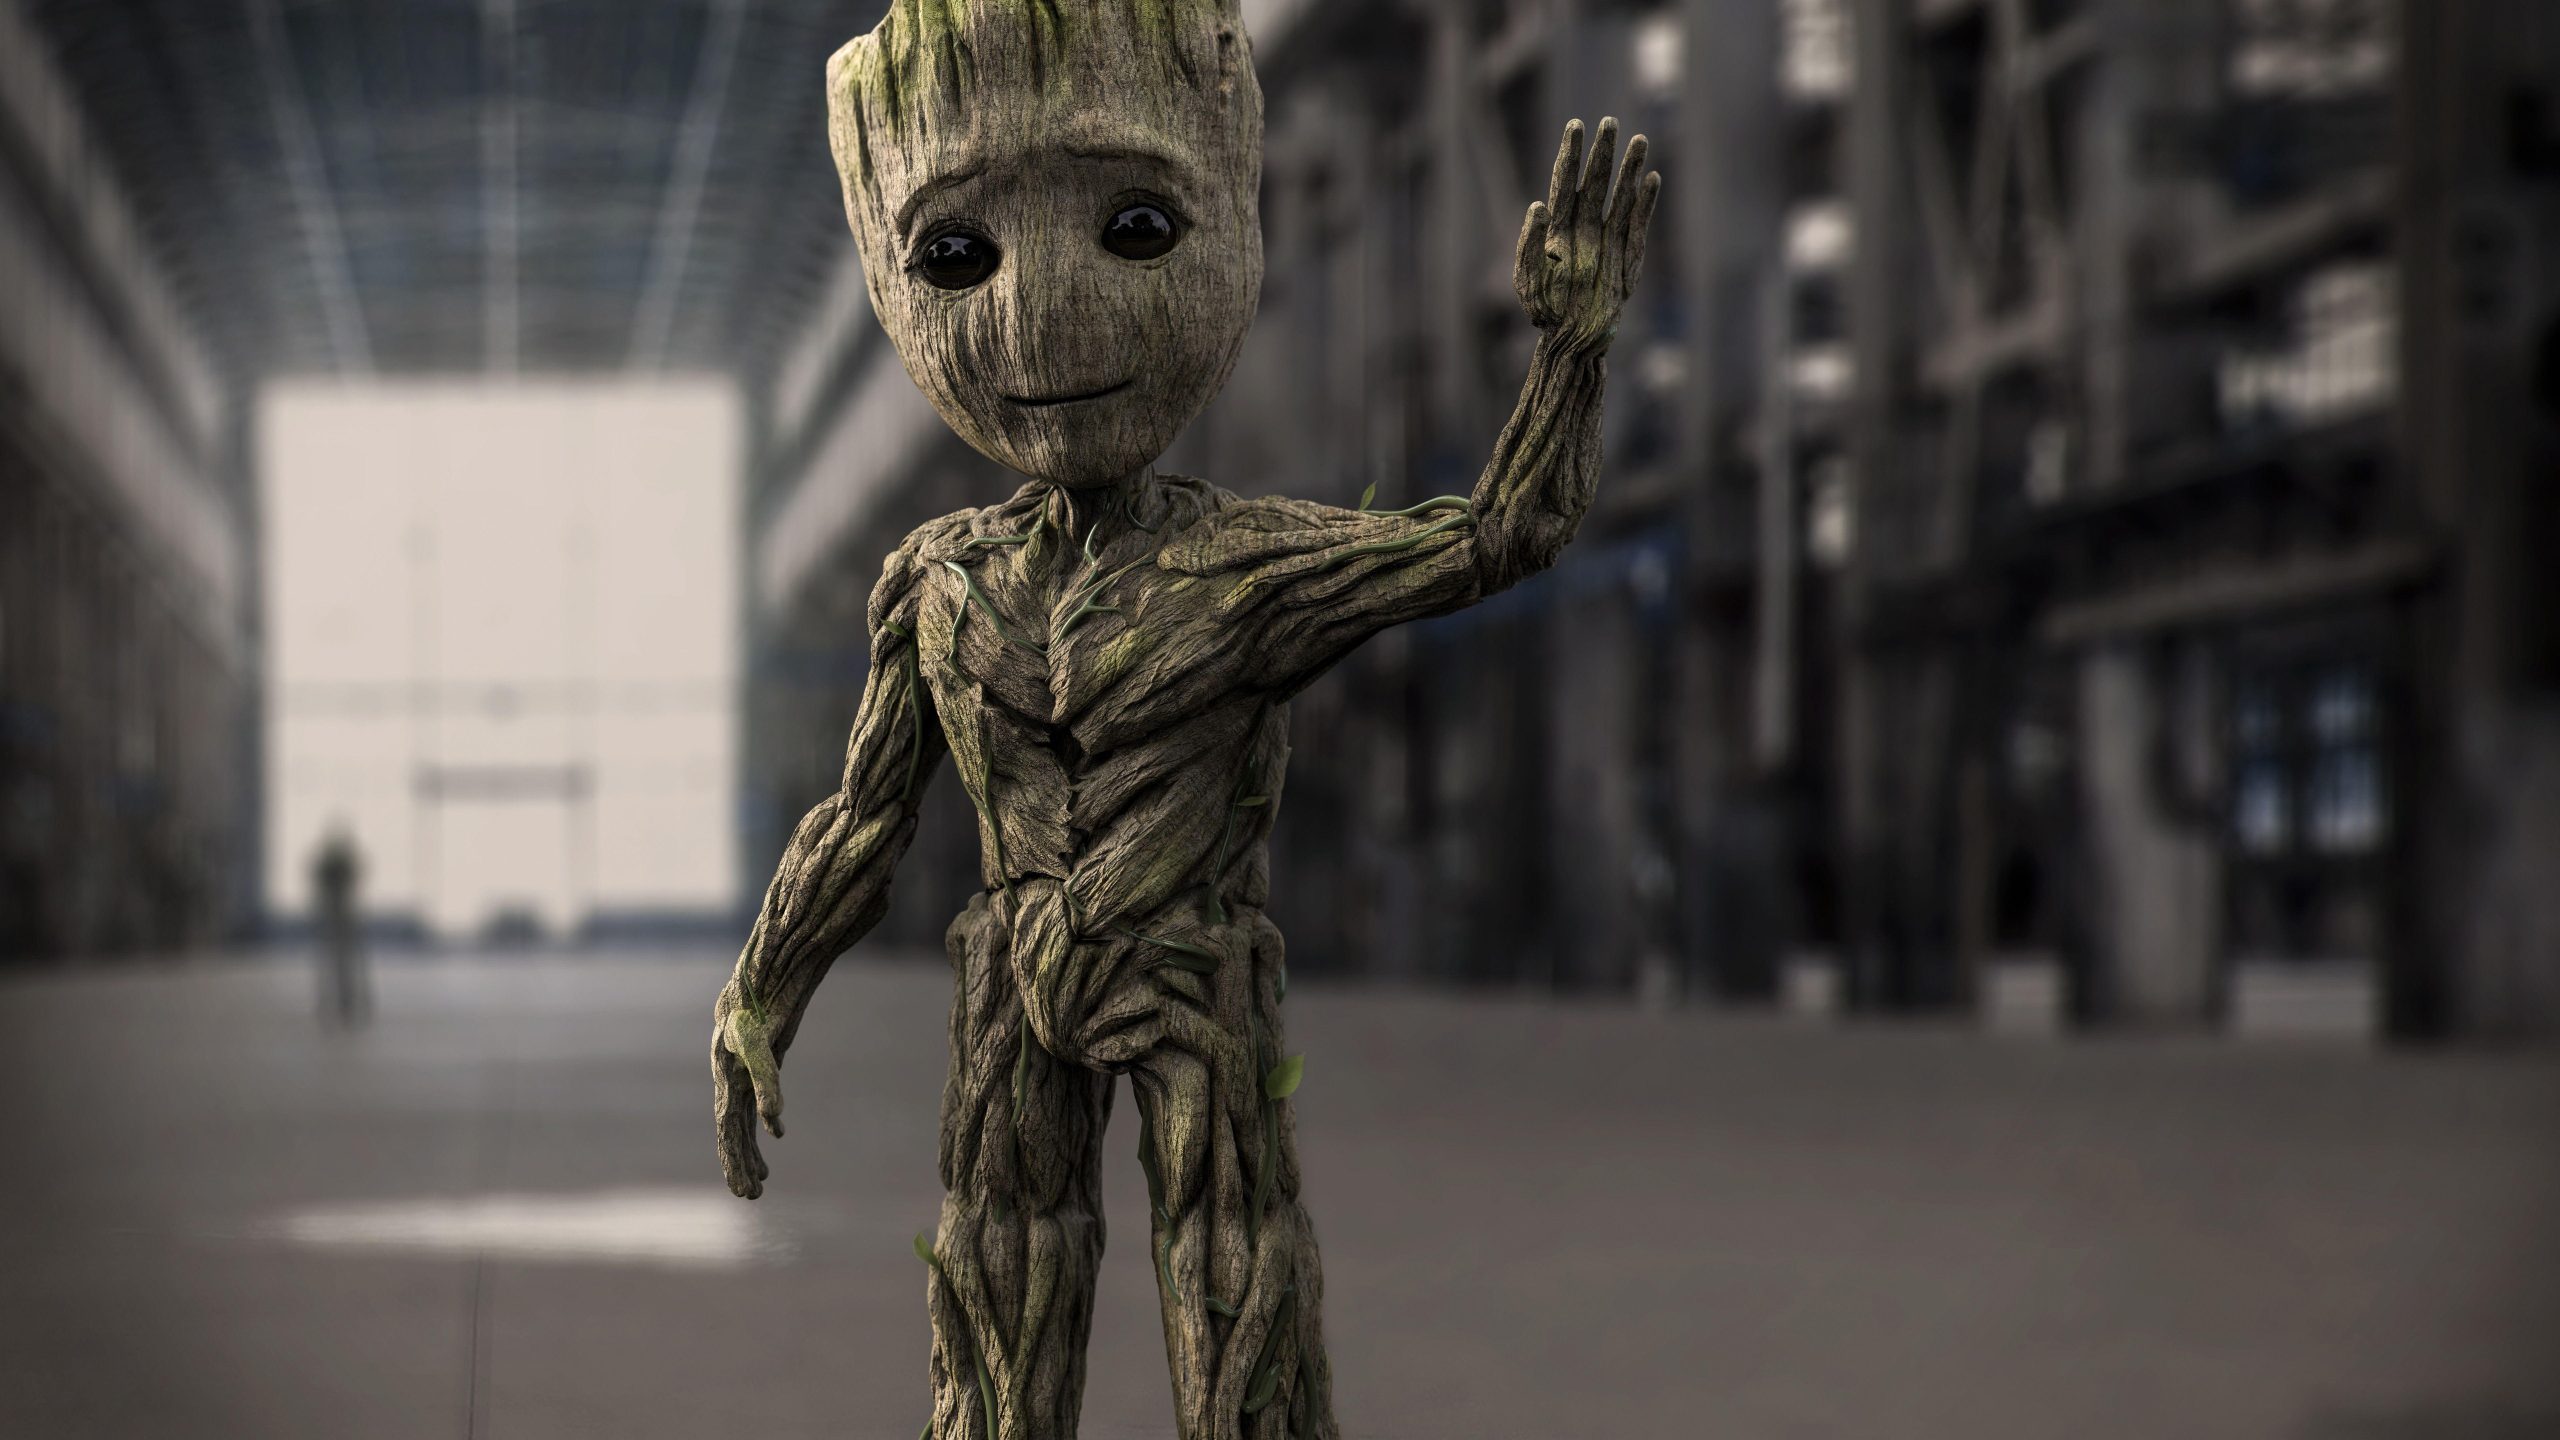 Cute Baby Groot Guardians Of The Galaxy Wallpaper Photo, Cute Baby Groot Guardians Of The Galaxy, Movies